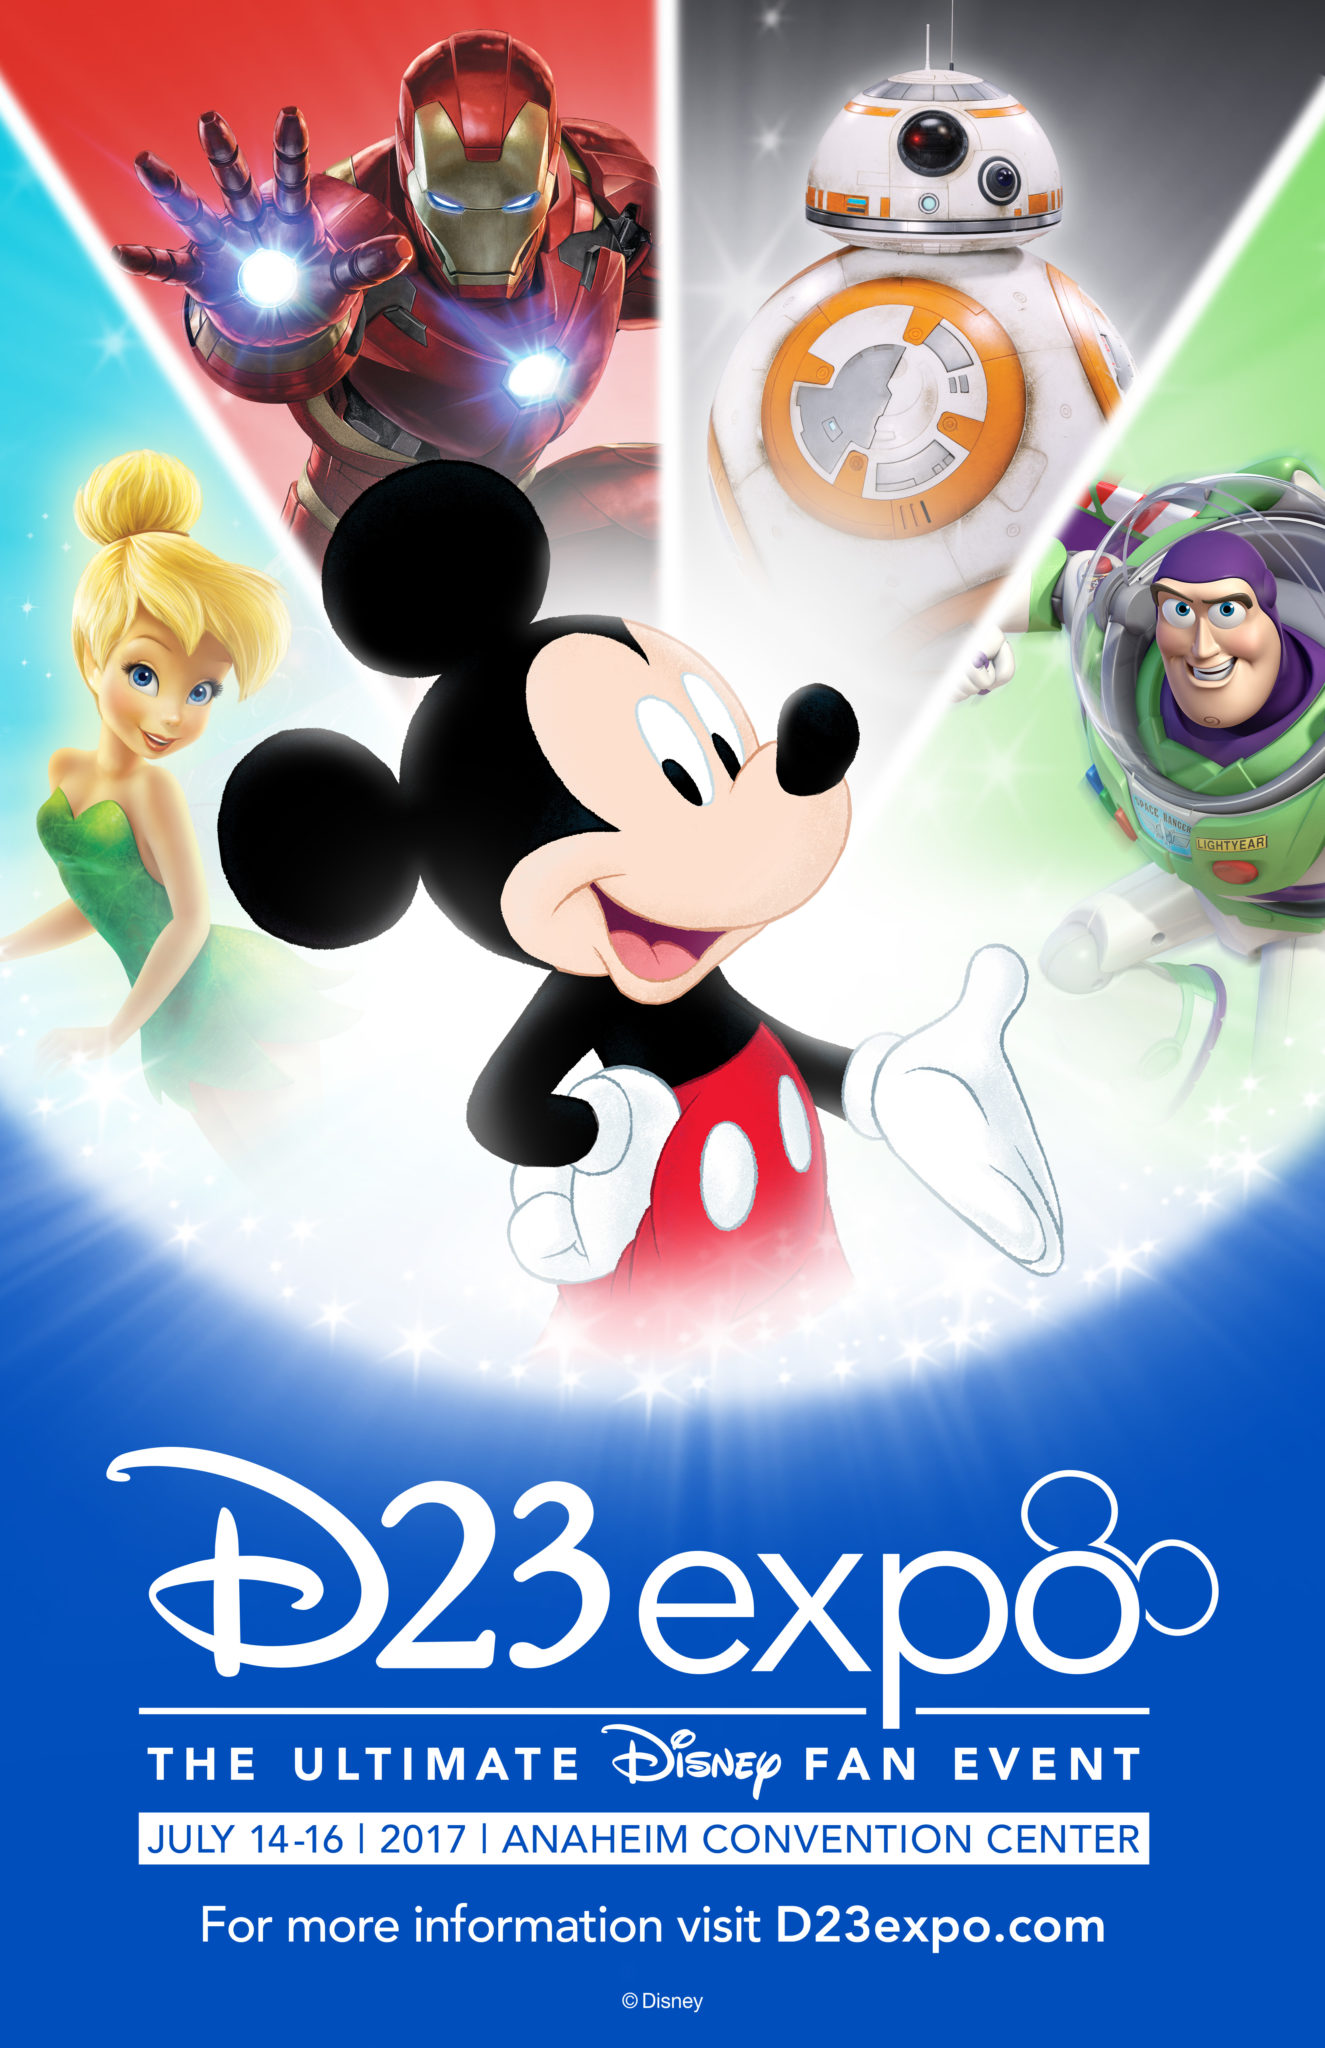 SingleDay Saturday Tickets To This Year's D23 Expo Have Sold Out